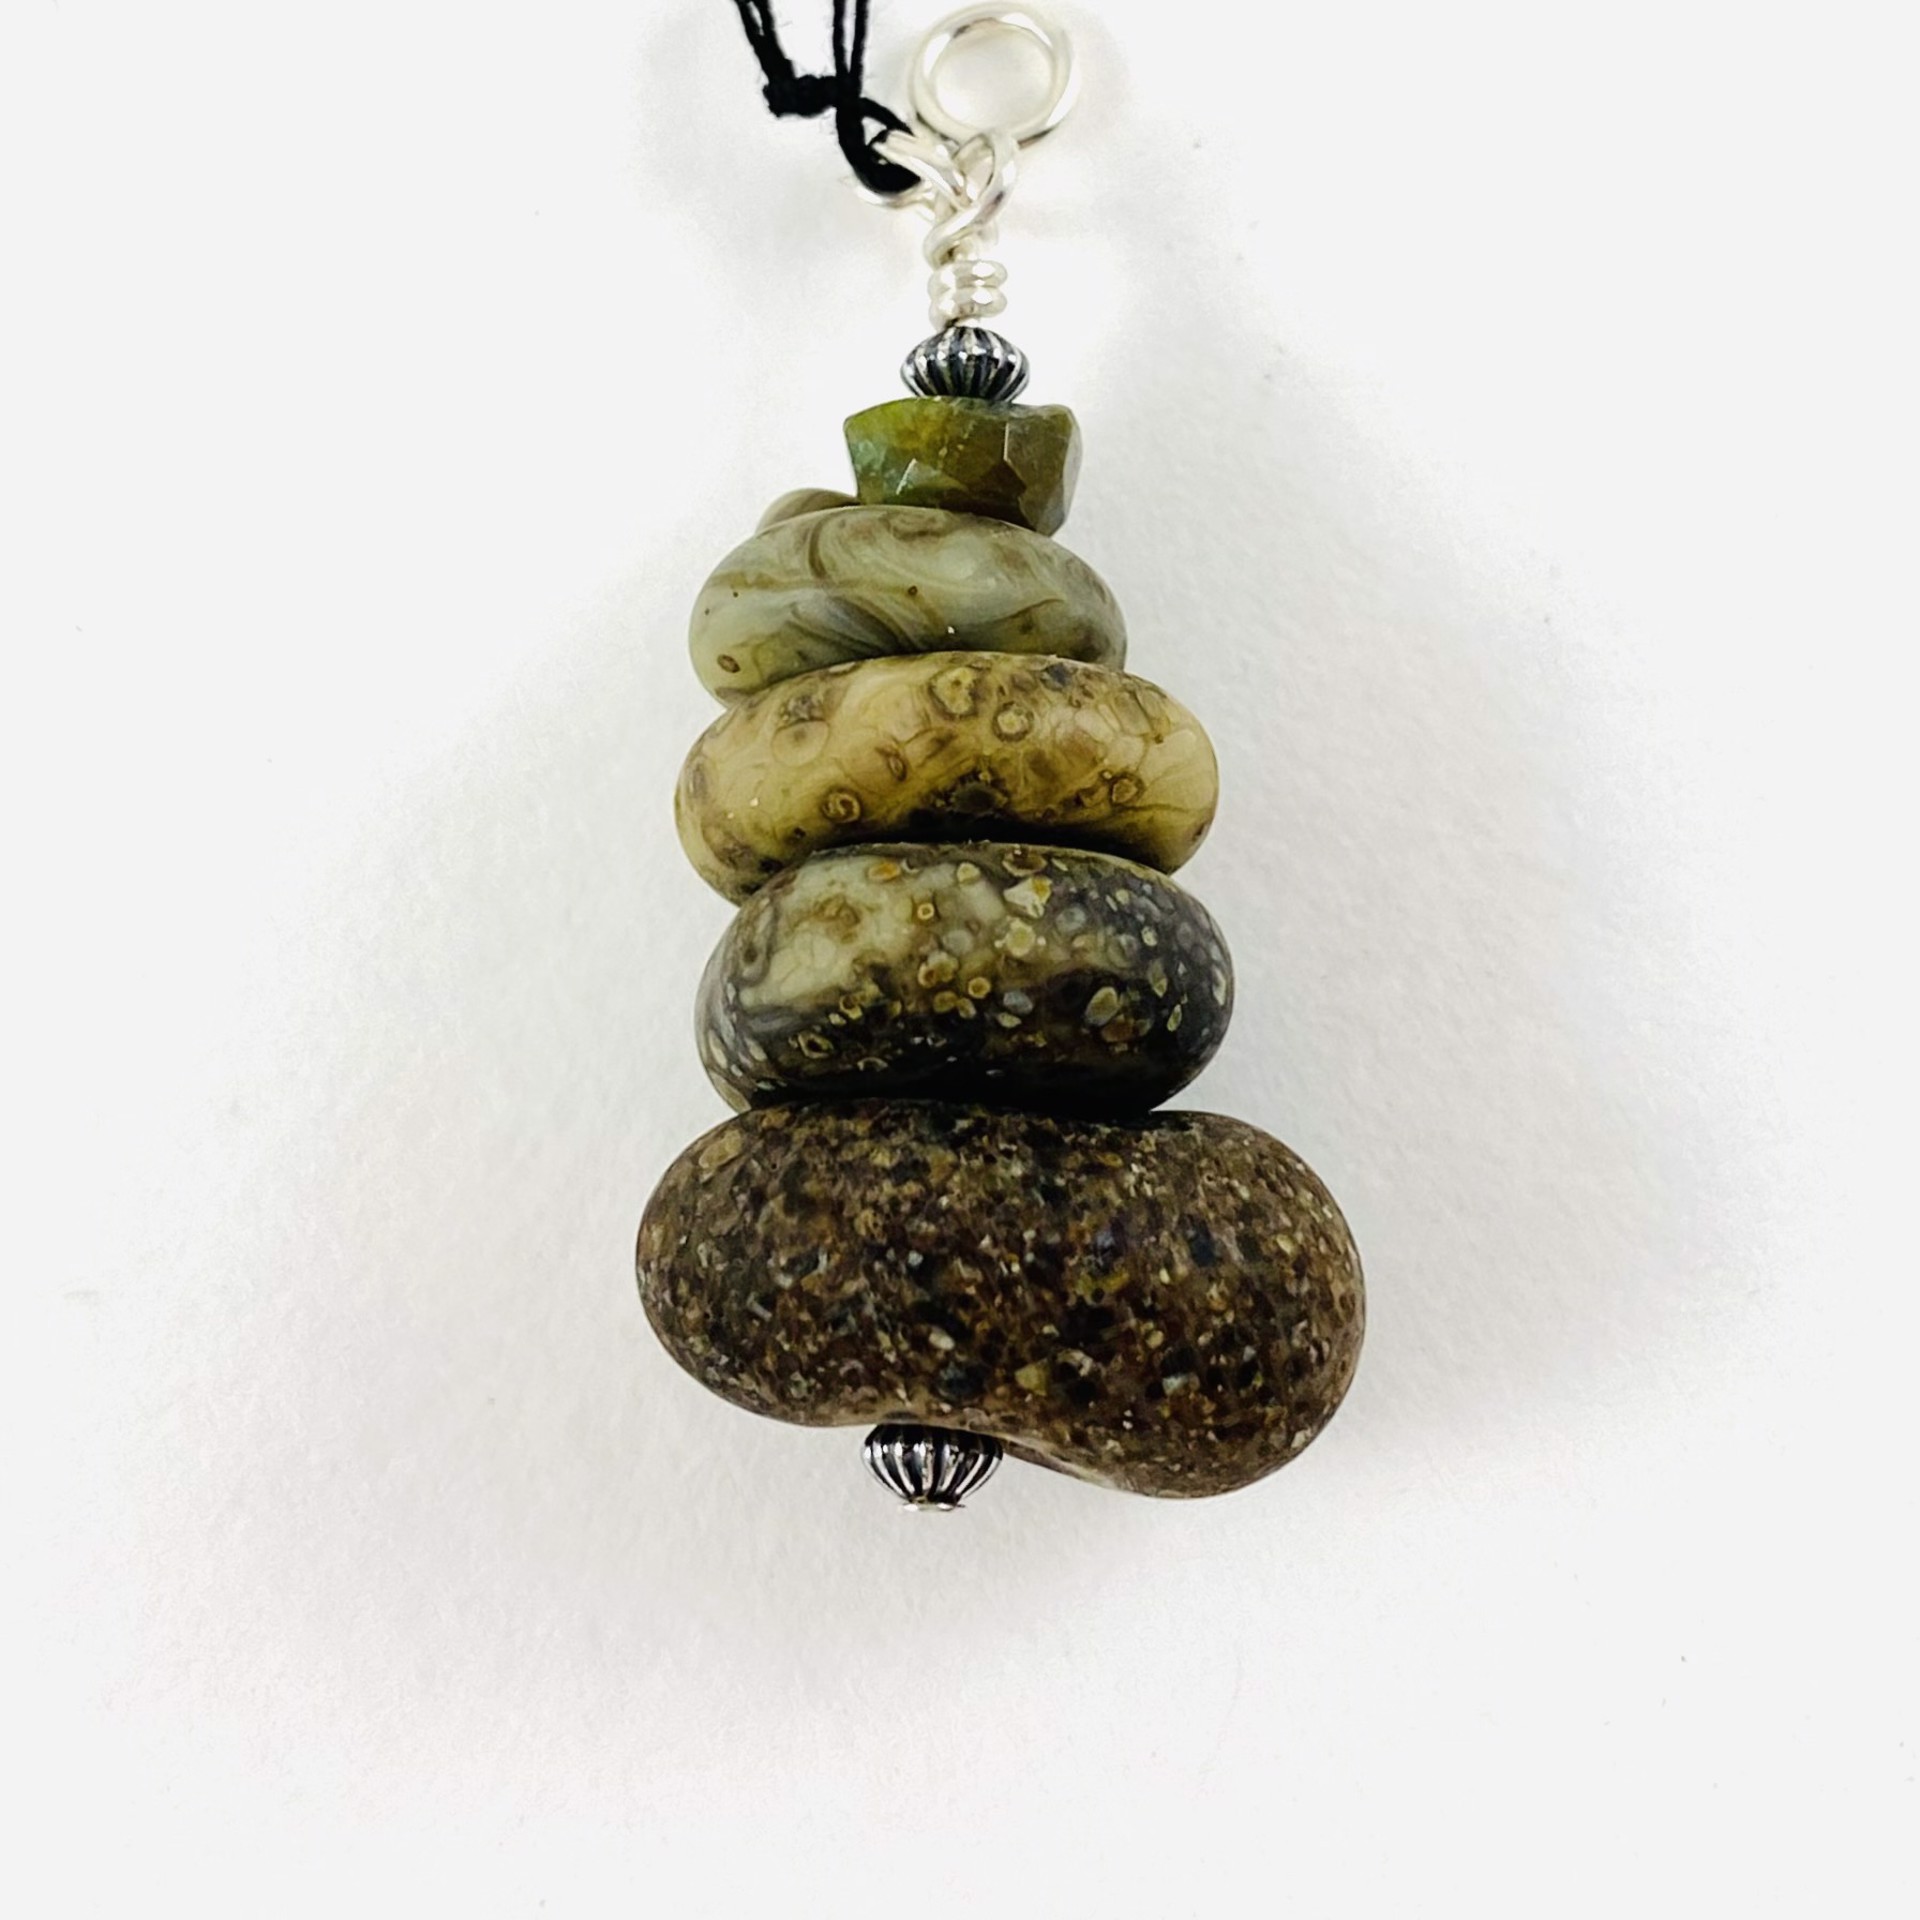 Stacked Stones Cairn Charm LS21-22 by Linda Sacra